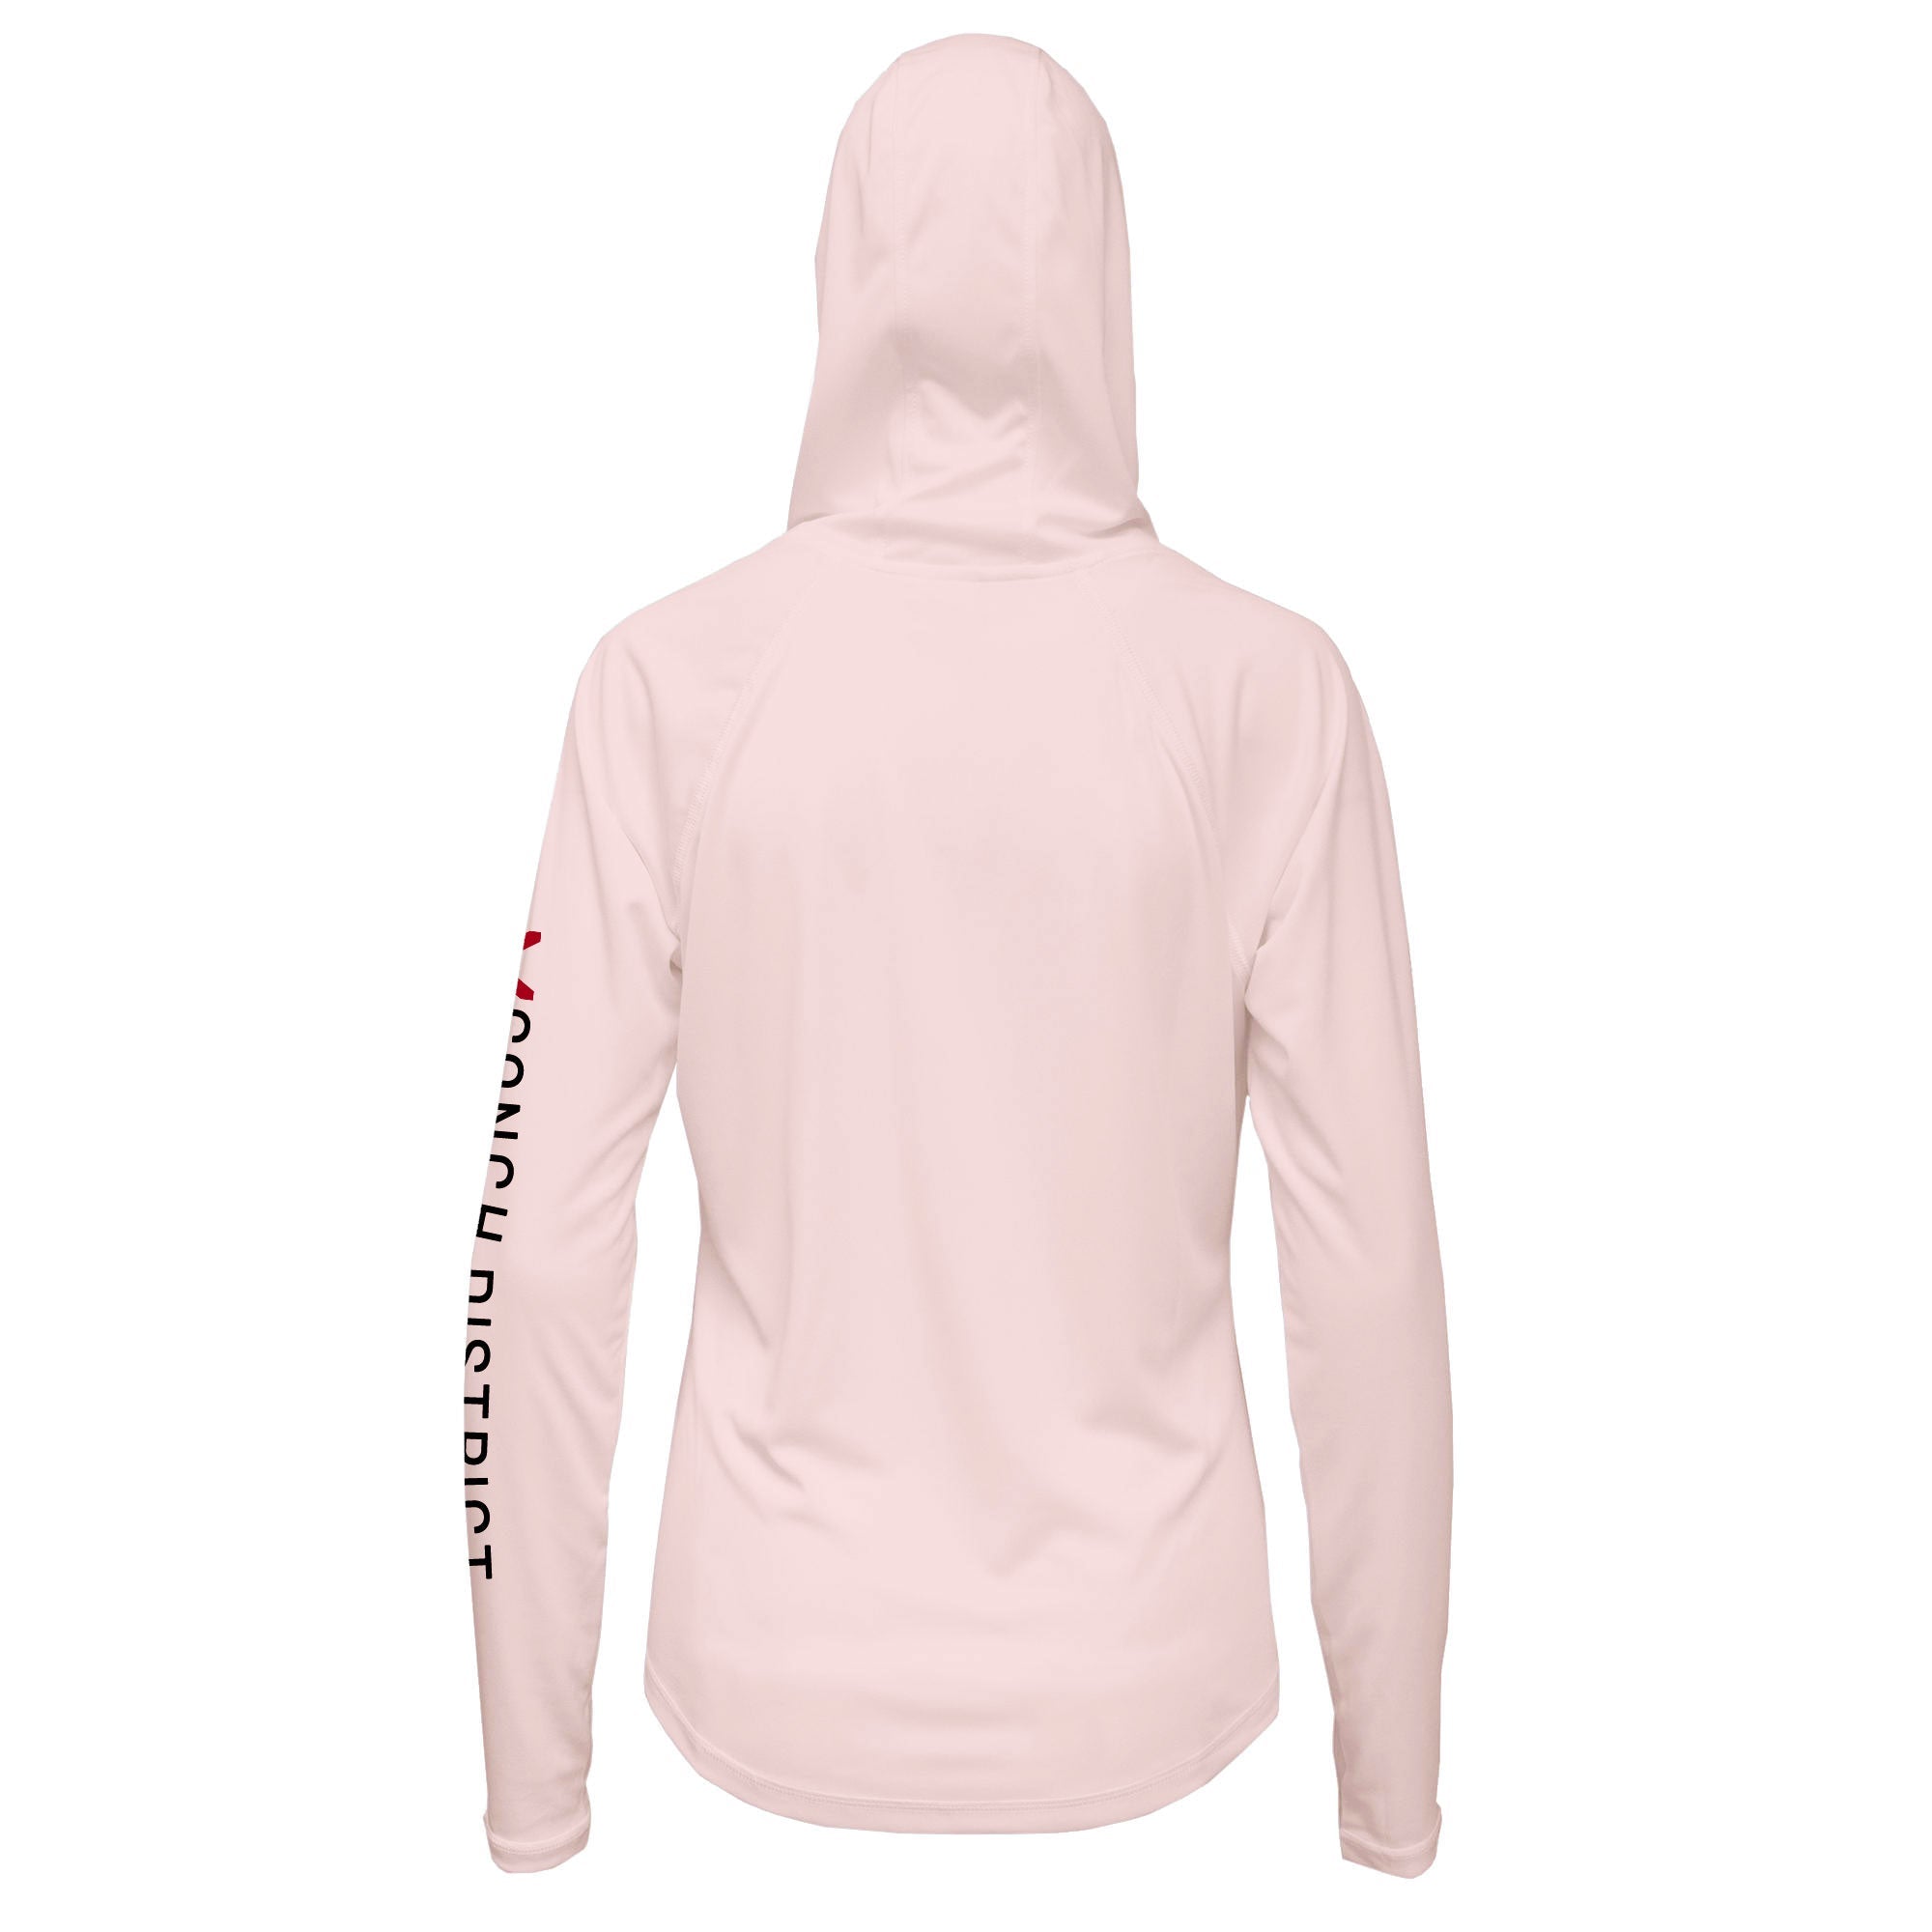 Kemps Ridley Sea Turtle Conservation Status Hoodie | Womens Recycled Solar Performance